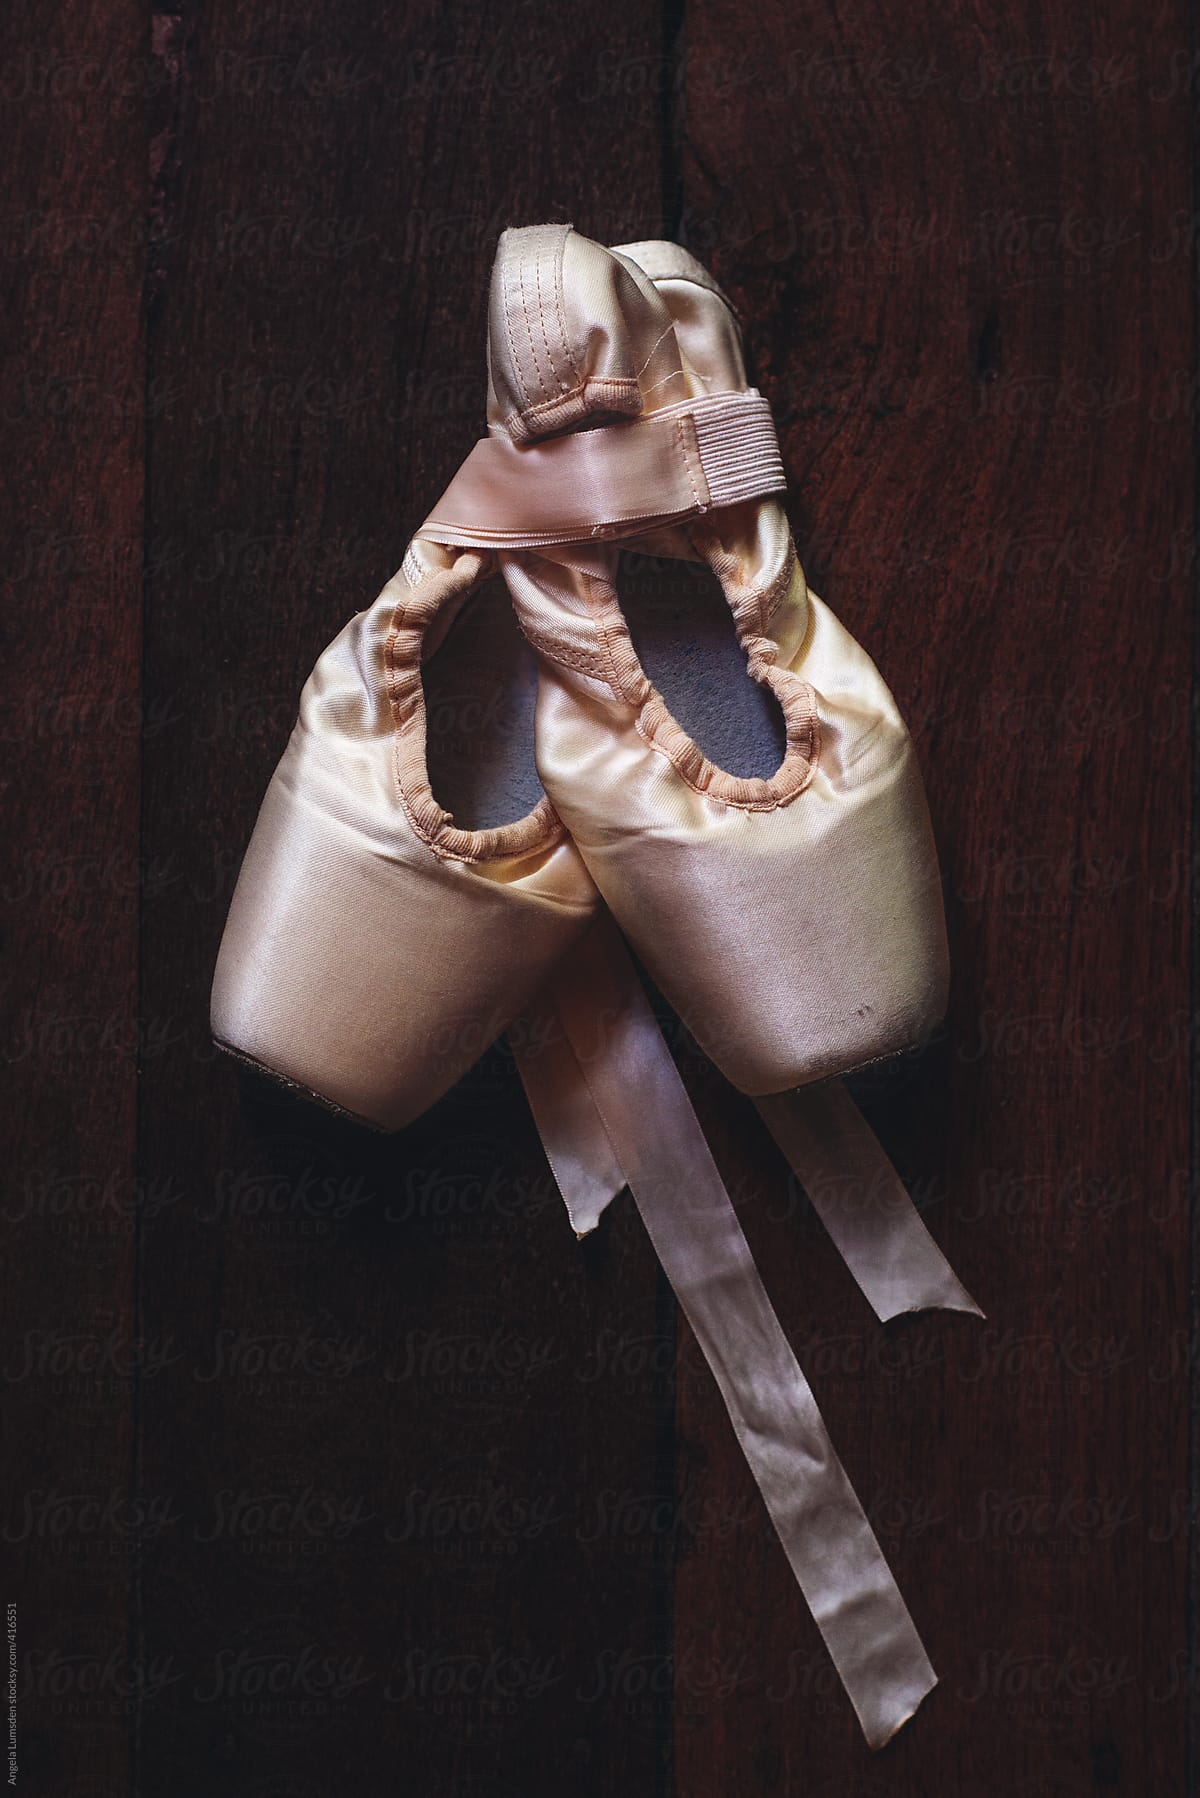 A pair of ballet pointe shoes with ribbons bound around the heels